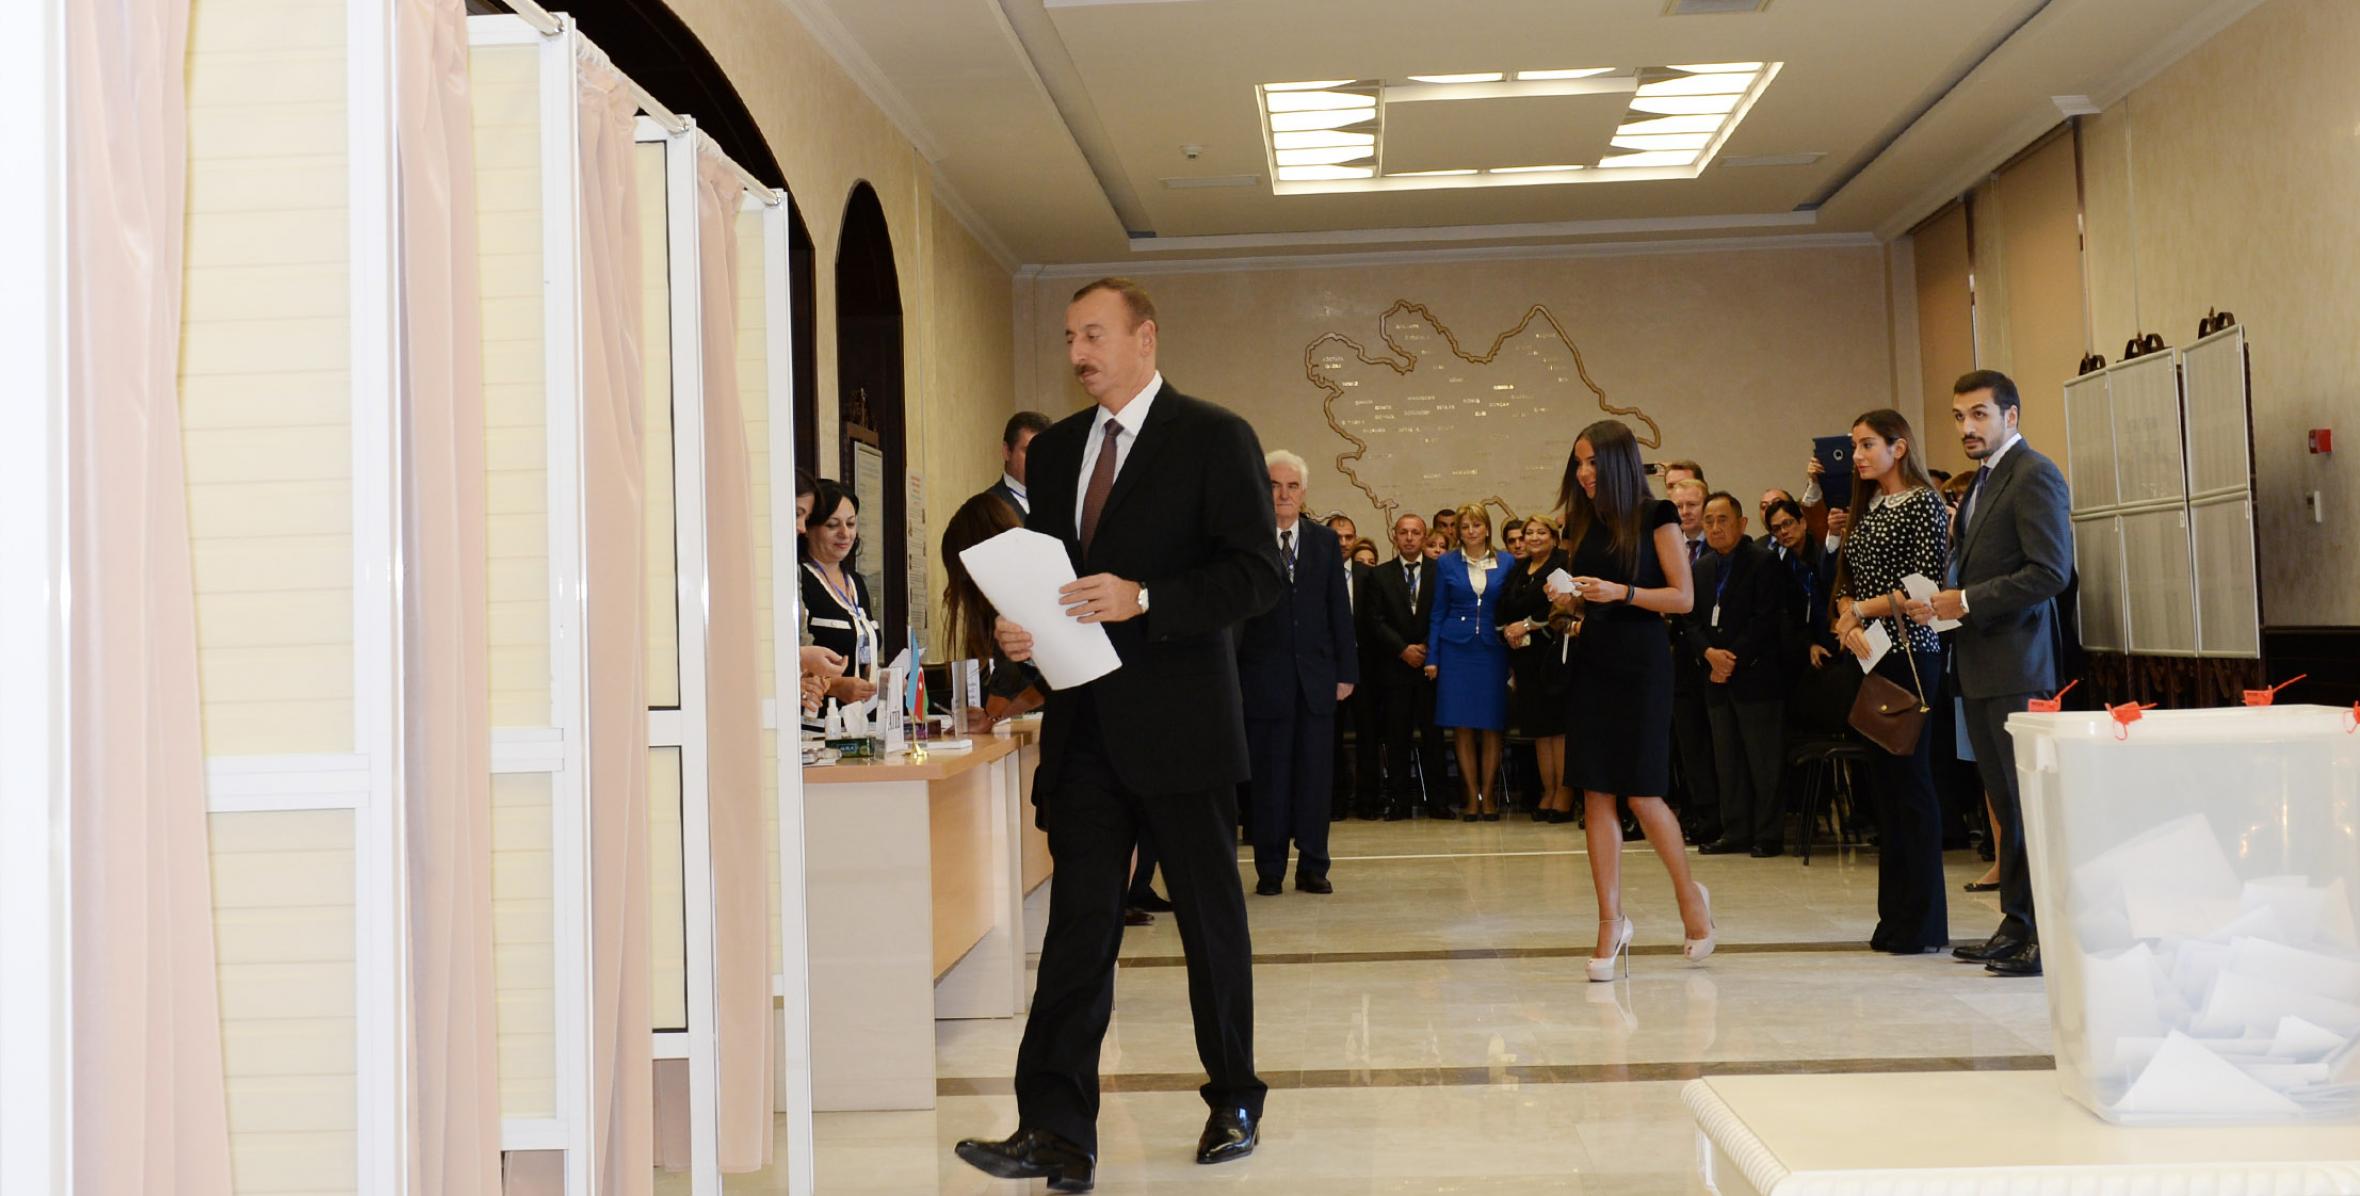 Ilham Aliyev cast his vote at polling station No 6